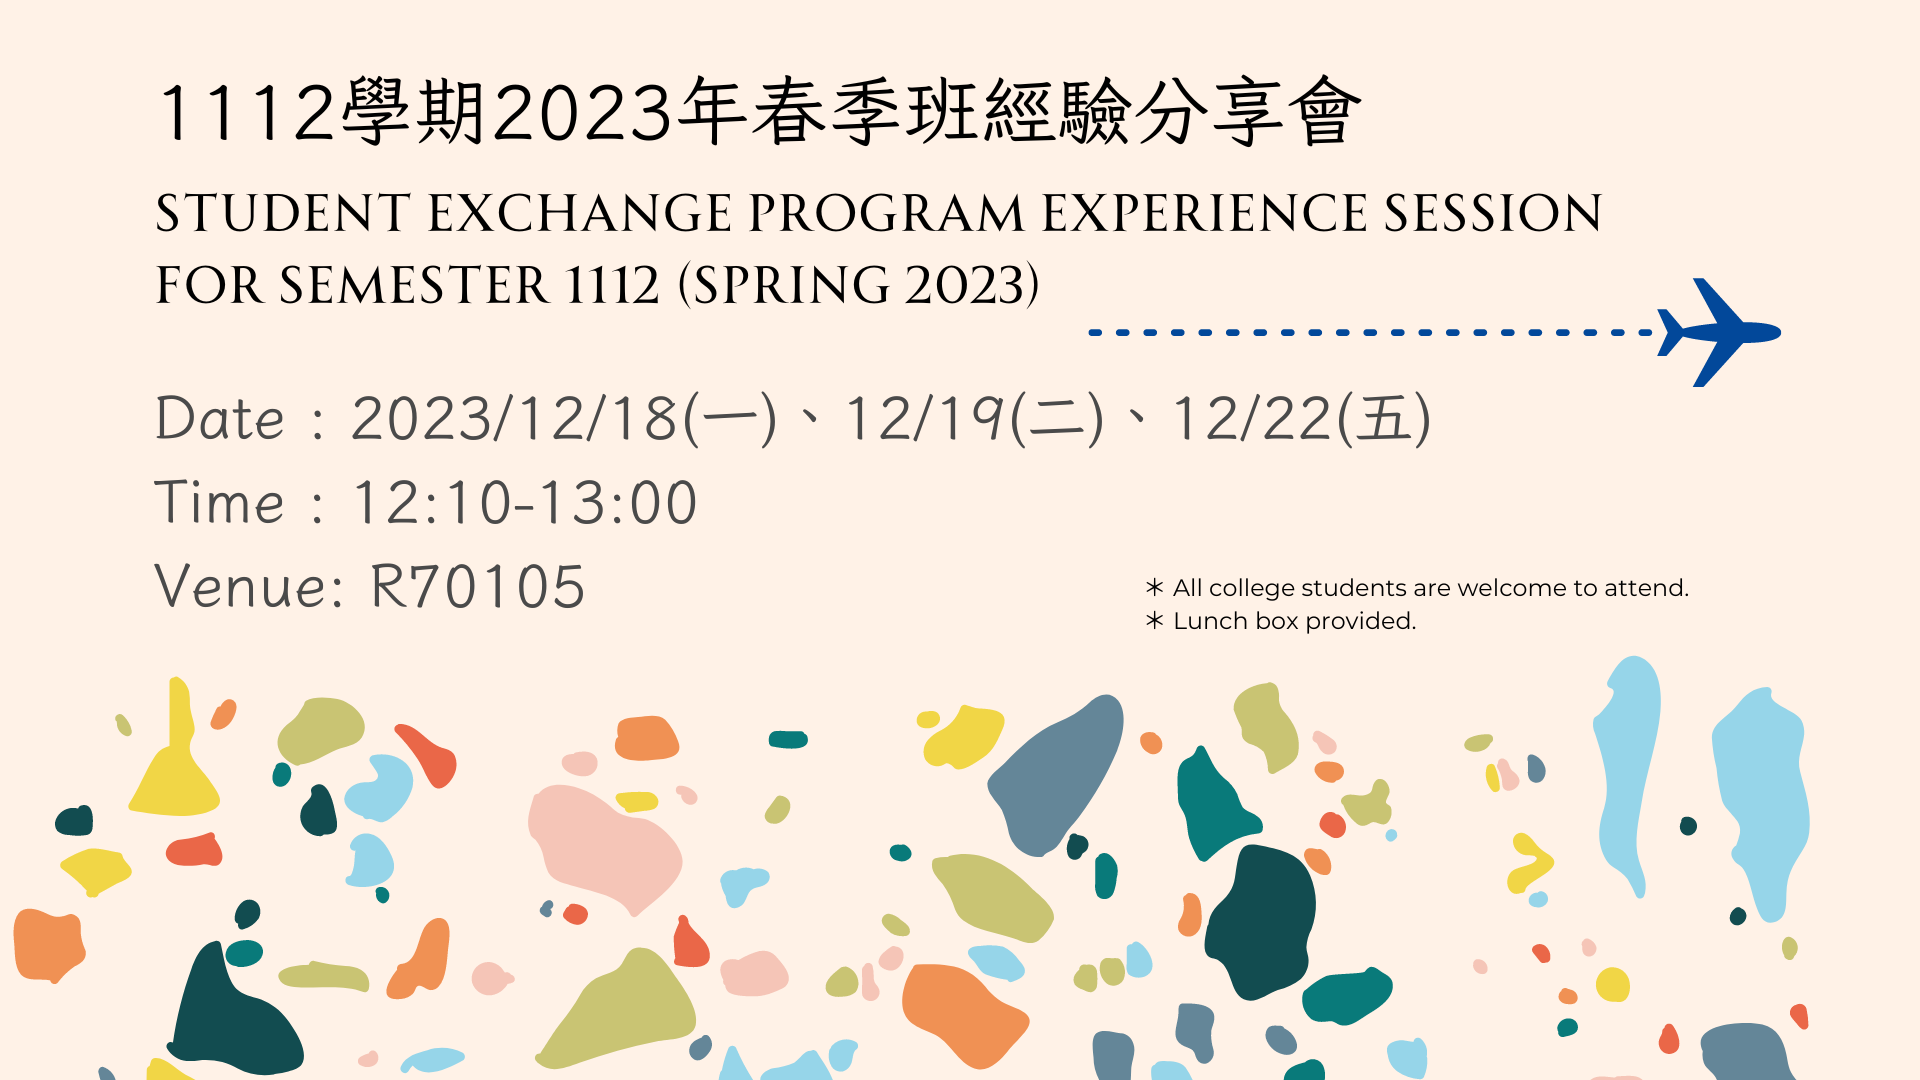 Welcome to attend the Student Exchange Program Experience Session for semester 1112 (Spring 2023)